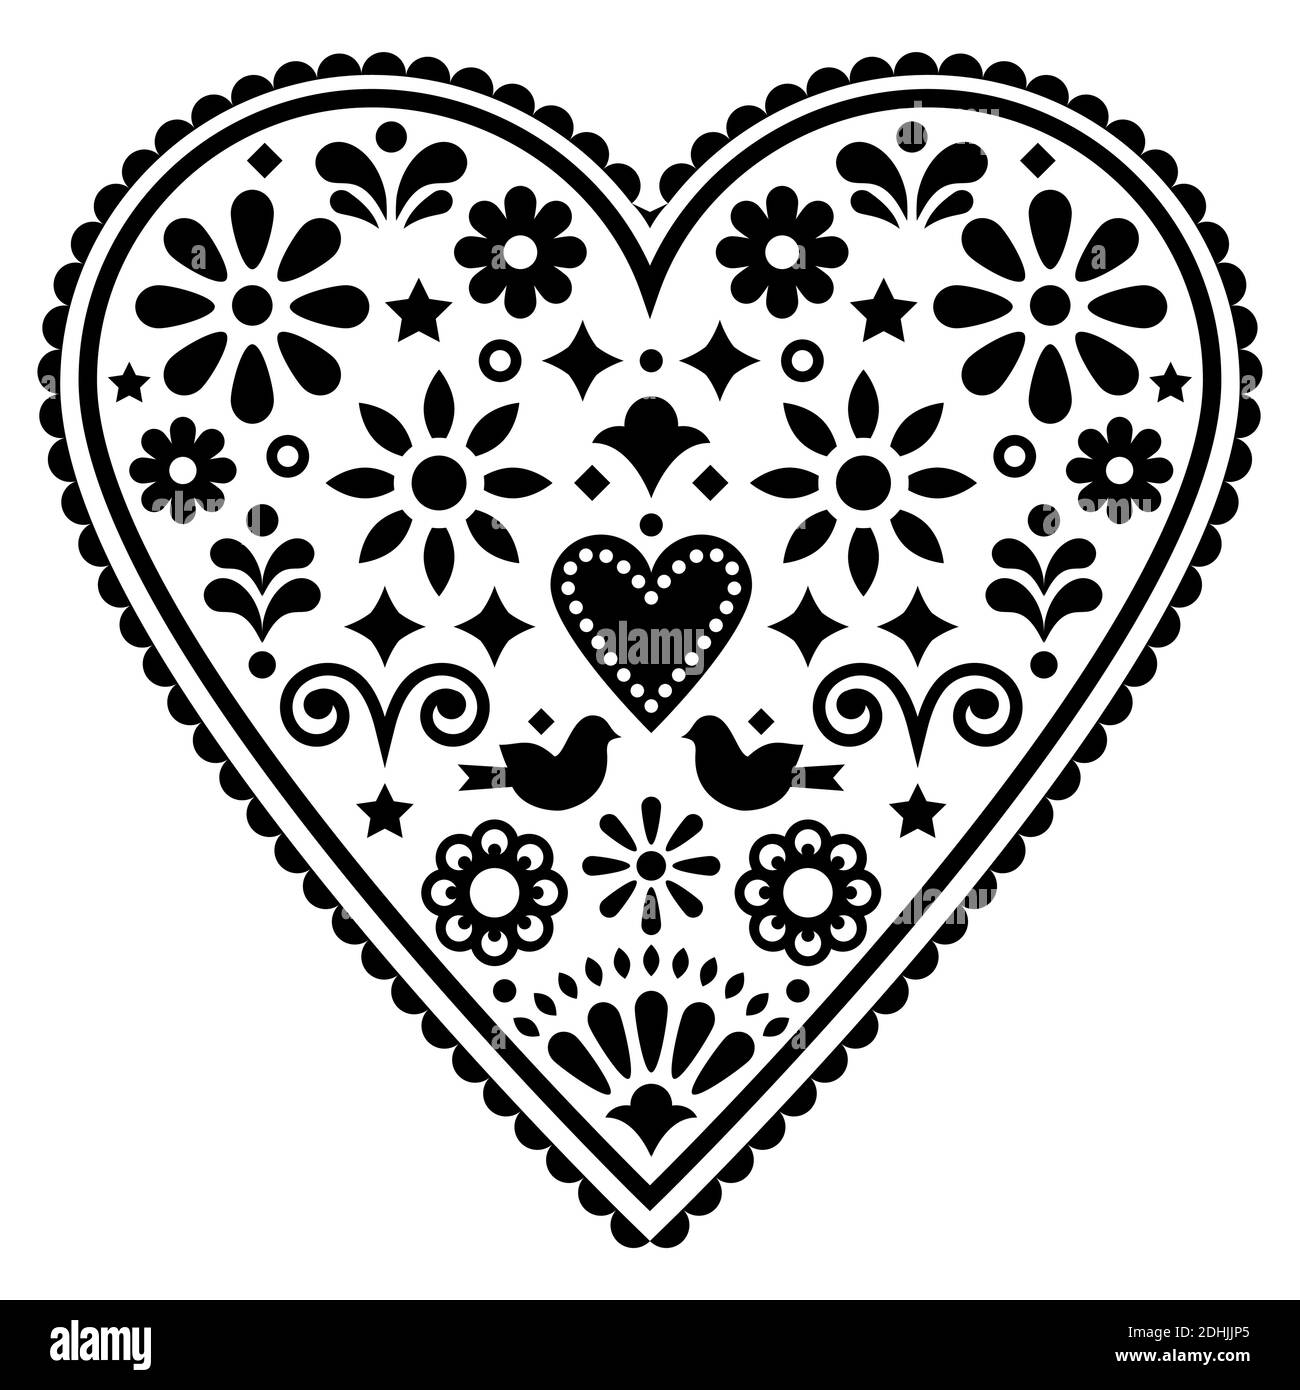 https://c8.alamy.com/comp/2DHJJP5/mexican-heart-folk-art-vector-design-monochrome-valentines-day-or-wedding-invitation-greeting-card-with-birds-and-flowers-2DHJJP5.jpg